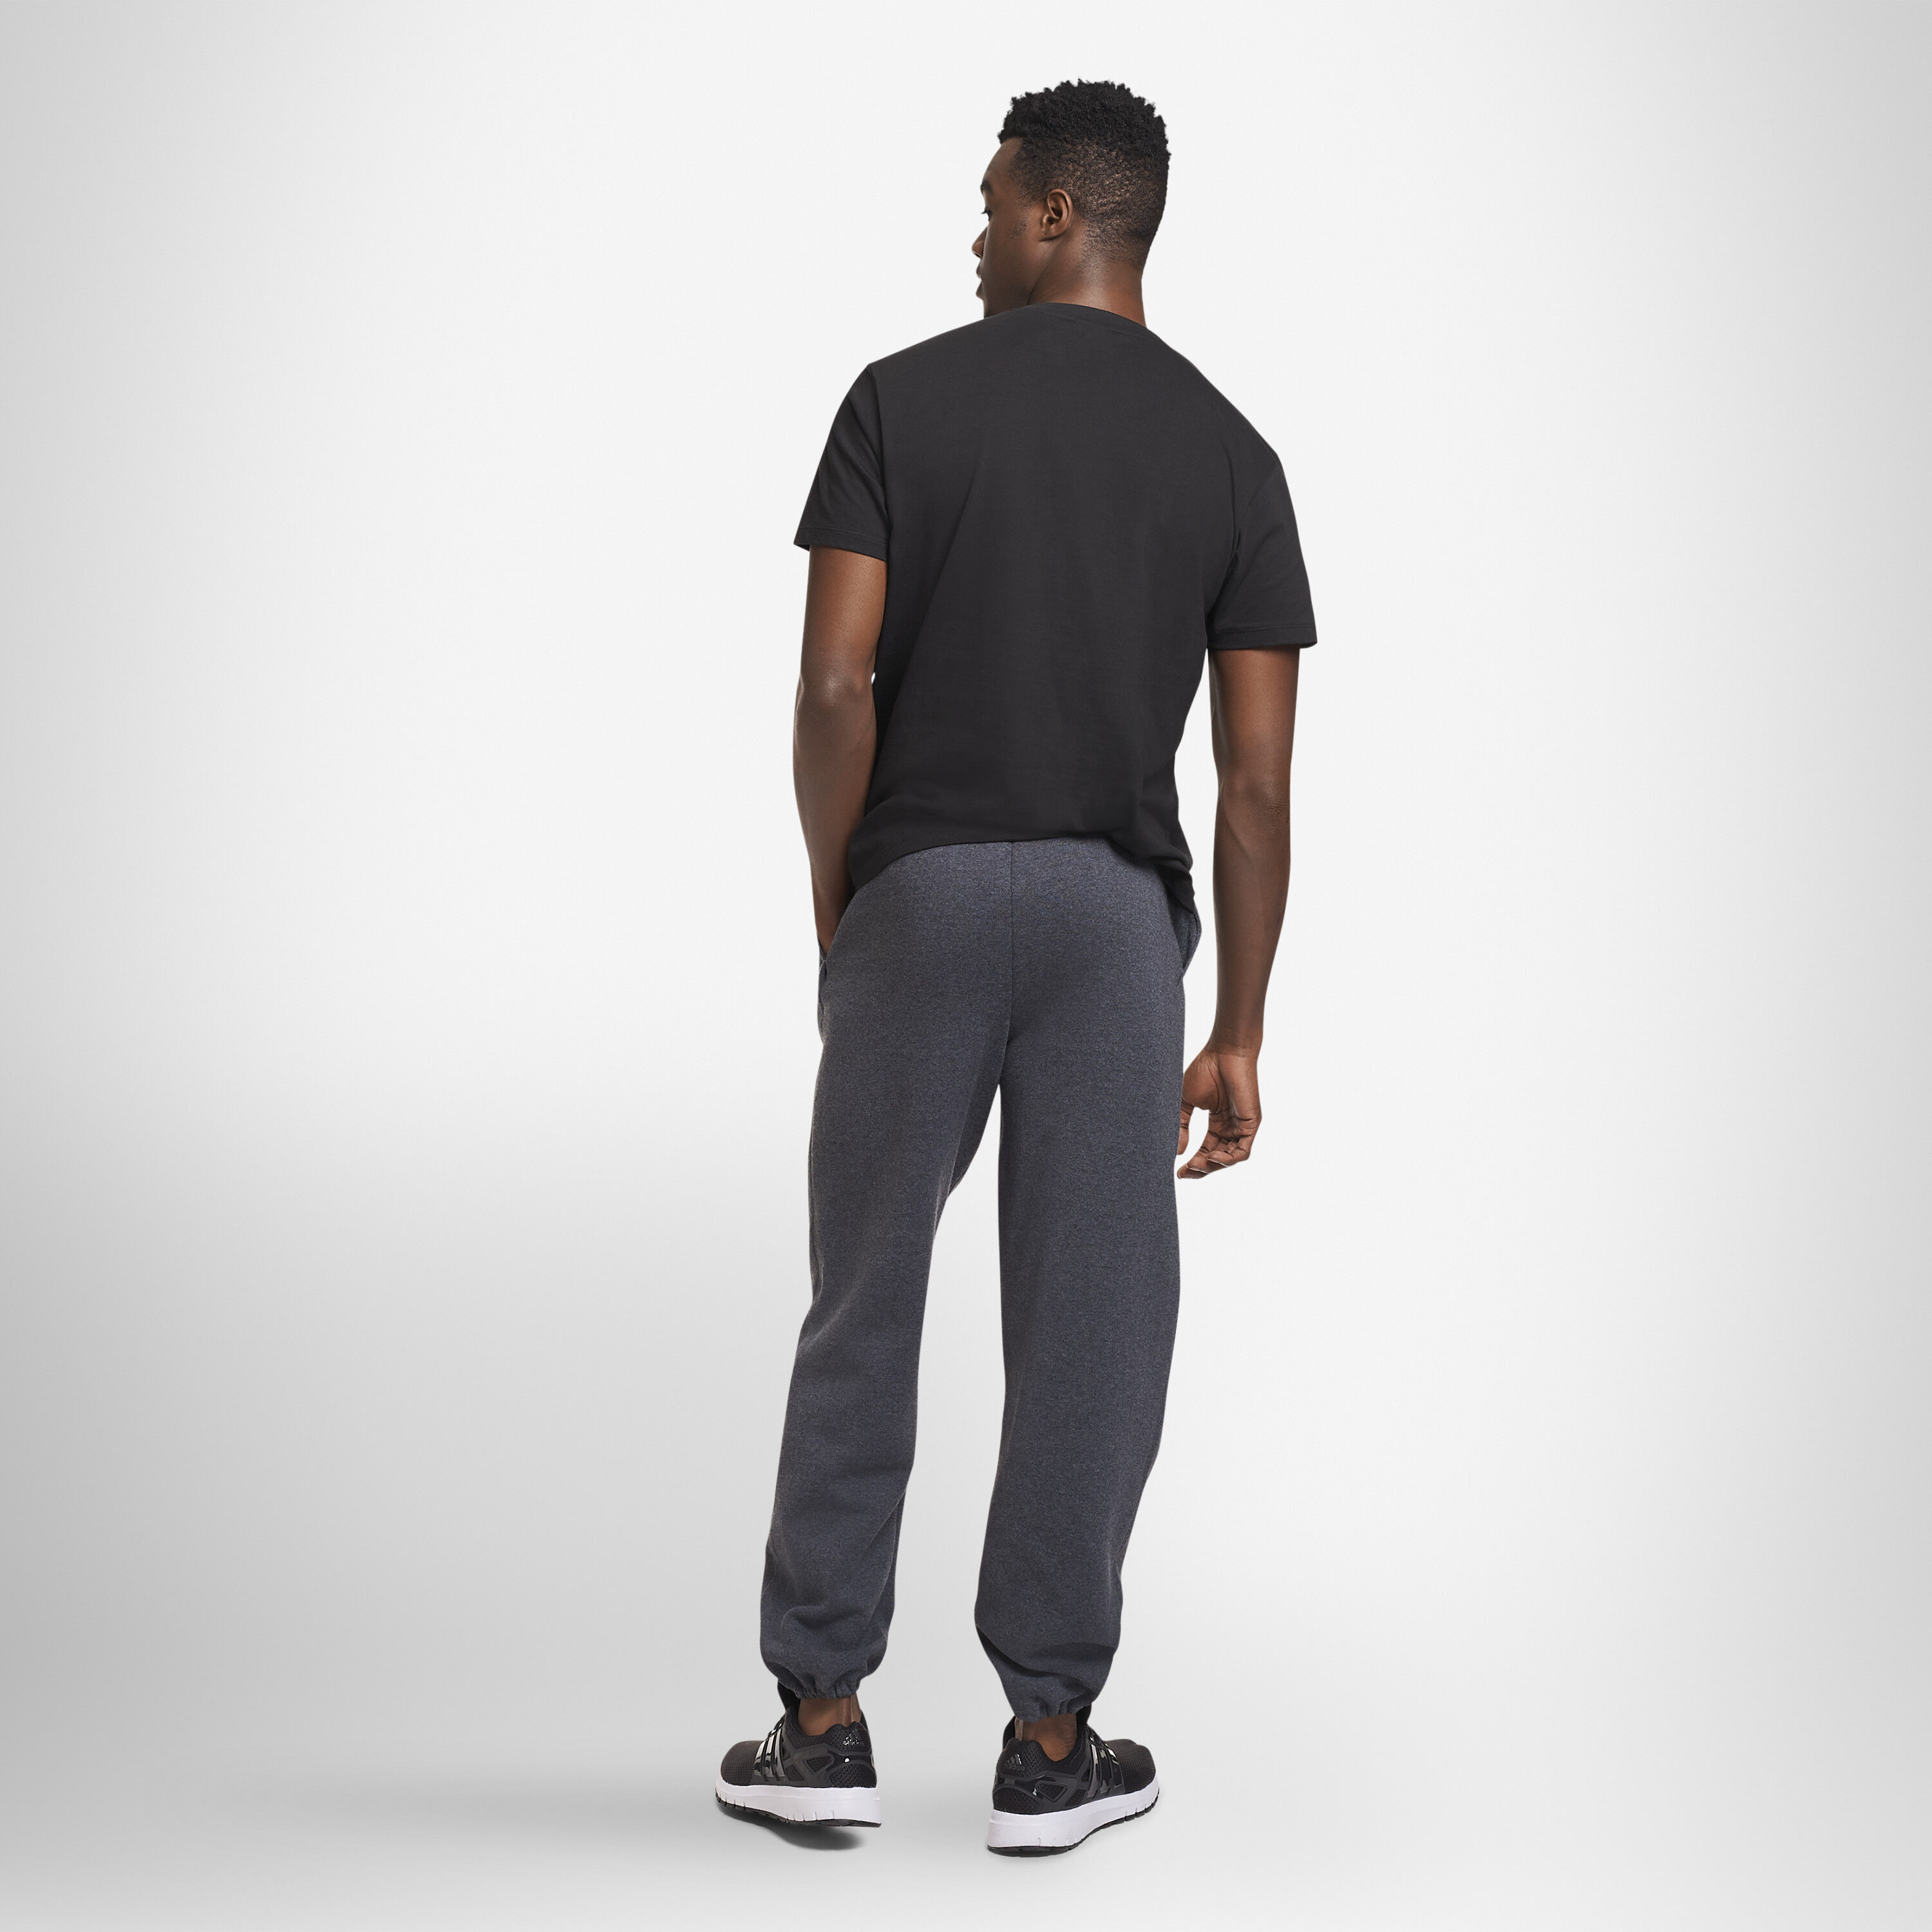 men's sweatpants with cuffed bottoms